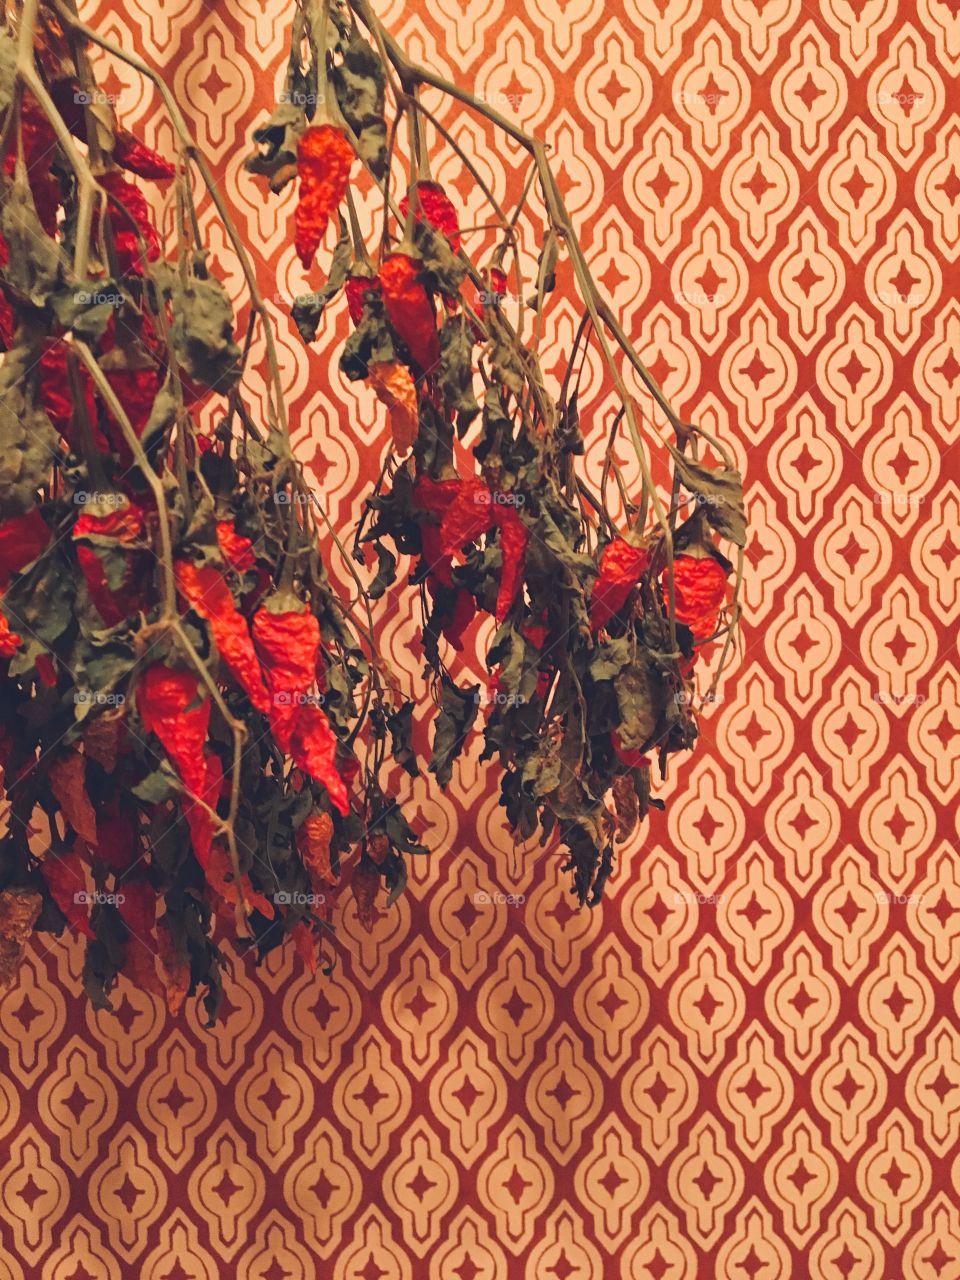 Dried chilies against the decorative wall